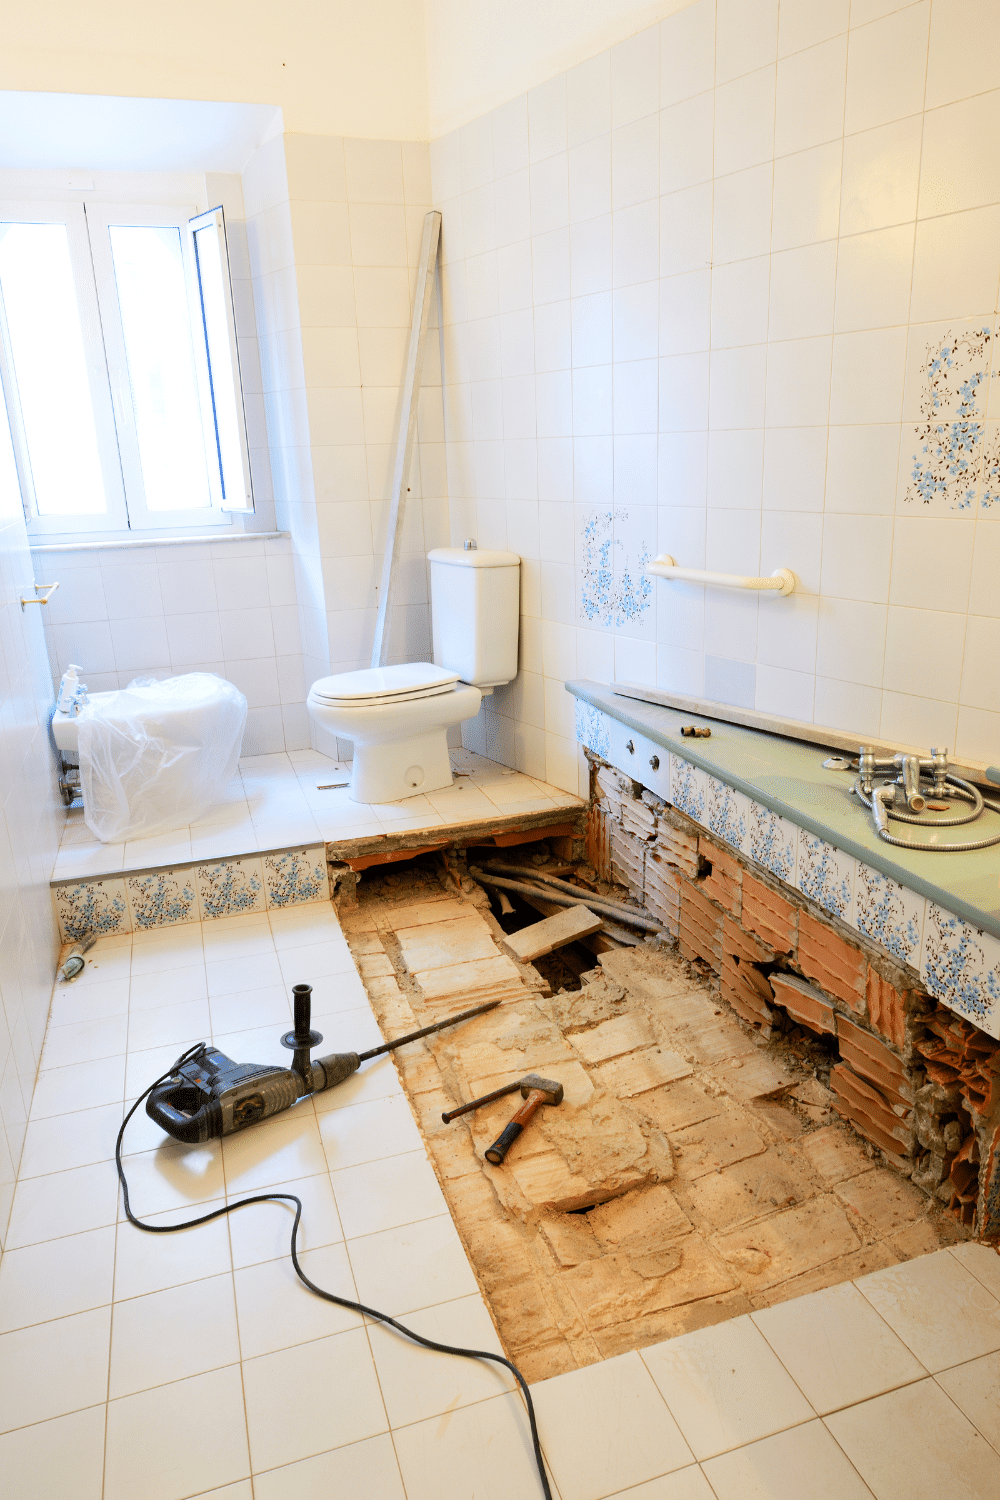 bathroom remodel in process with flooring removed